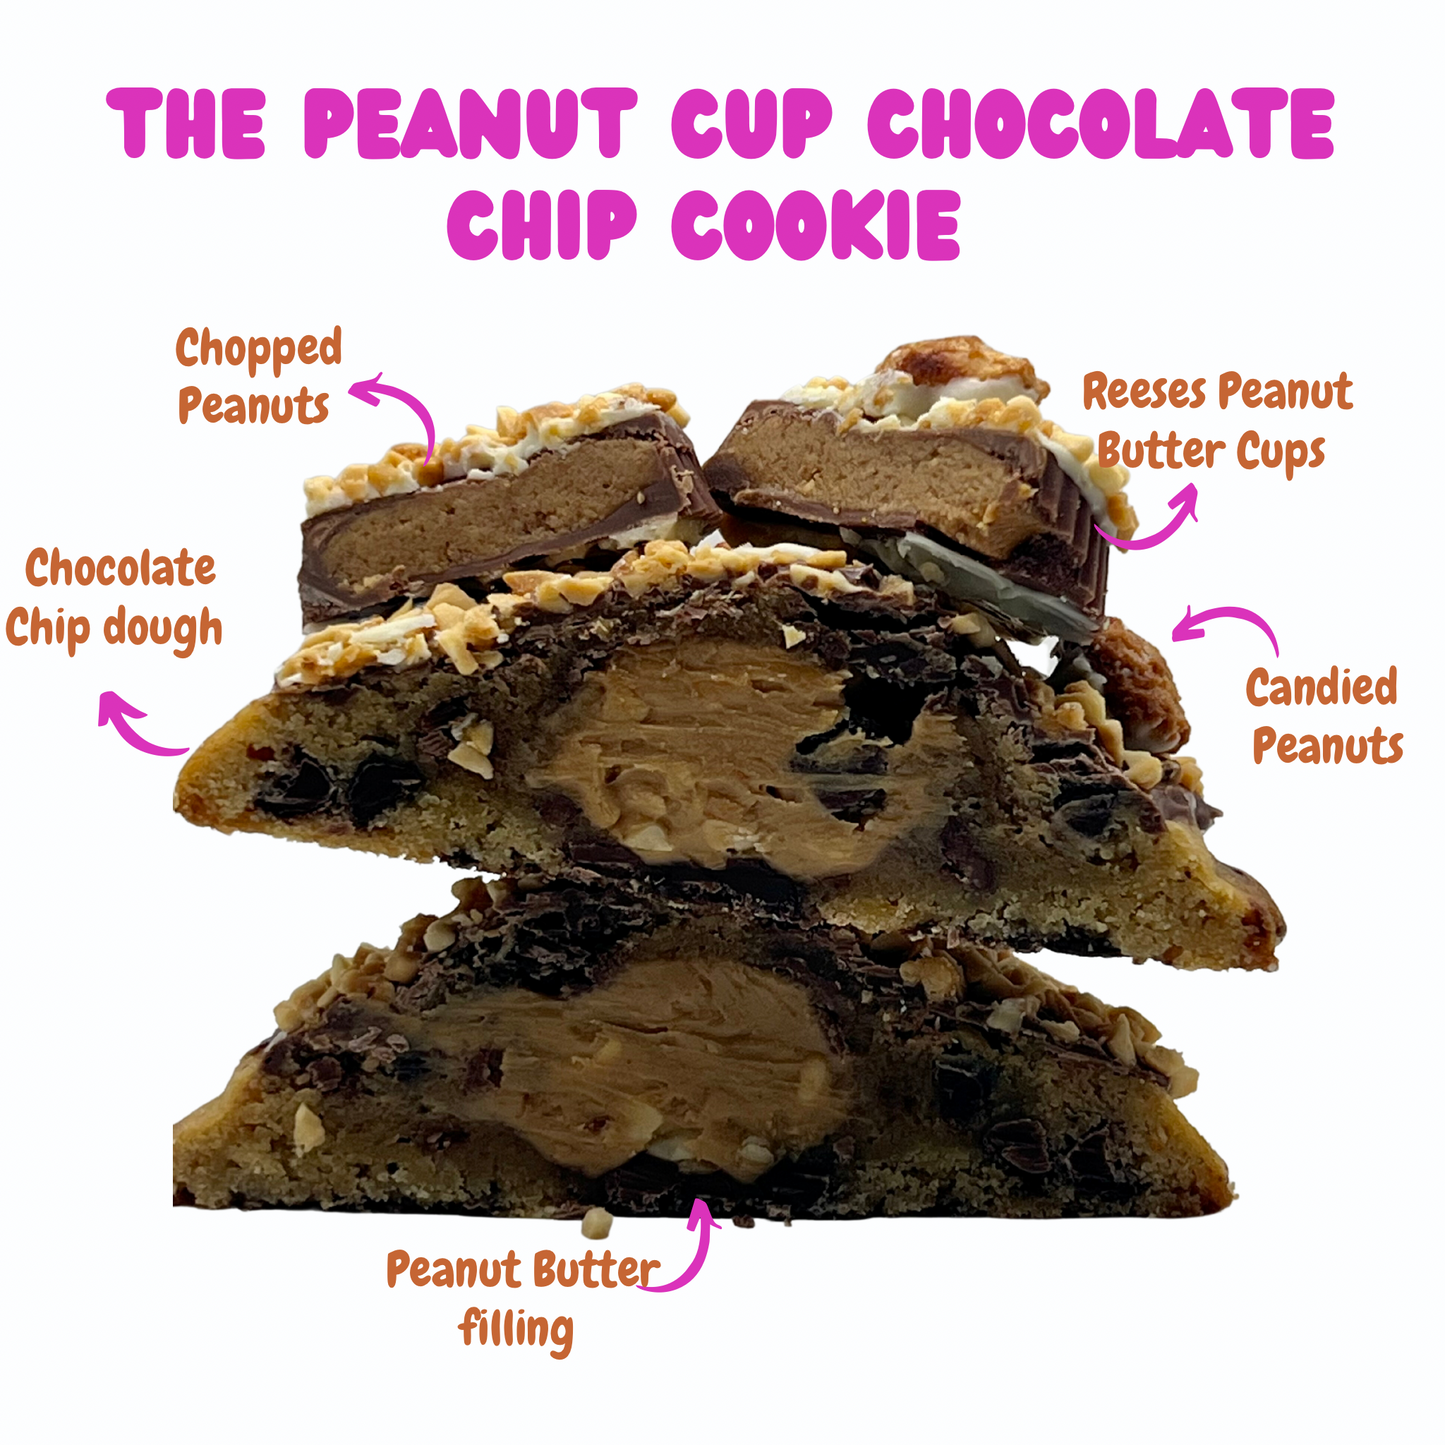 The Peanut Cup Chocolate Chip Cookie broken in half, revealing the gooey chocolate and peanut butter inside.